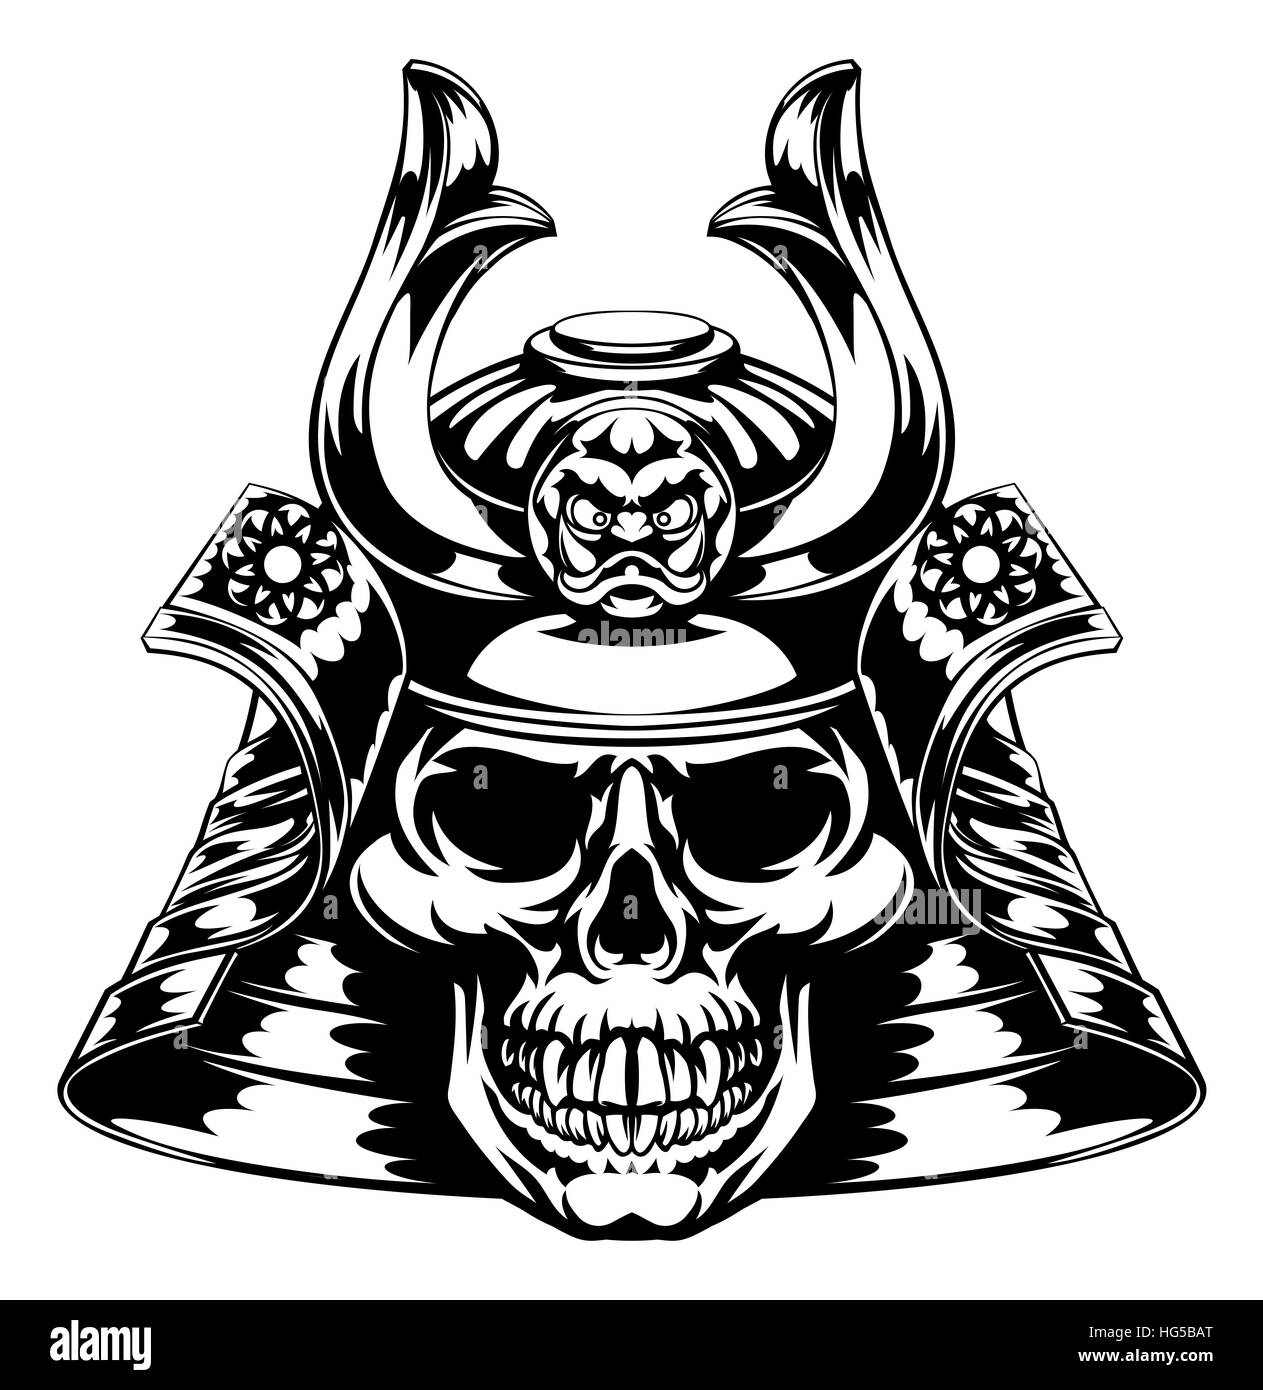 A skeletal skull face samurai with mask and helmet Stock Photo